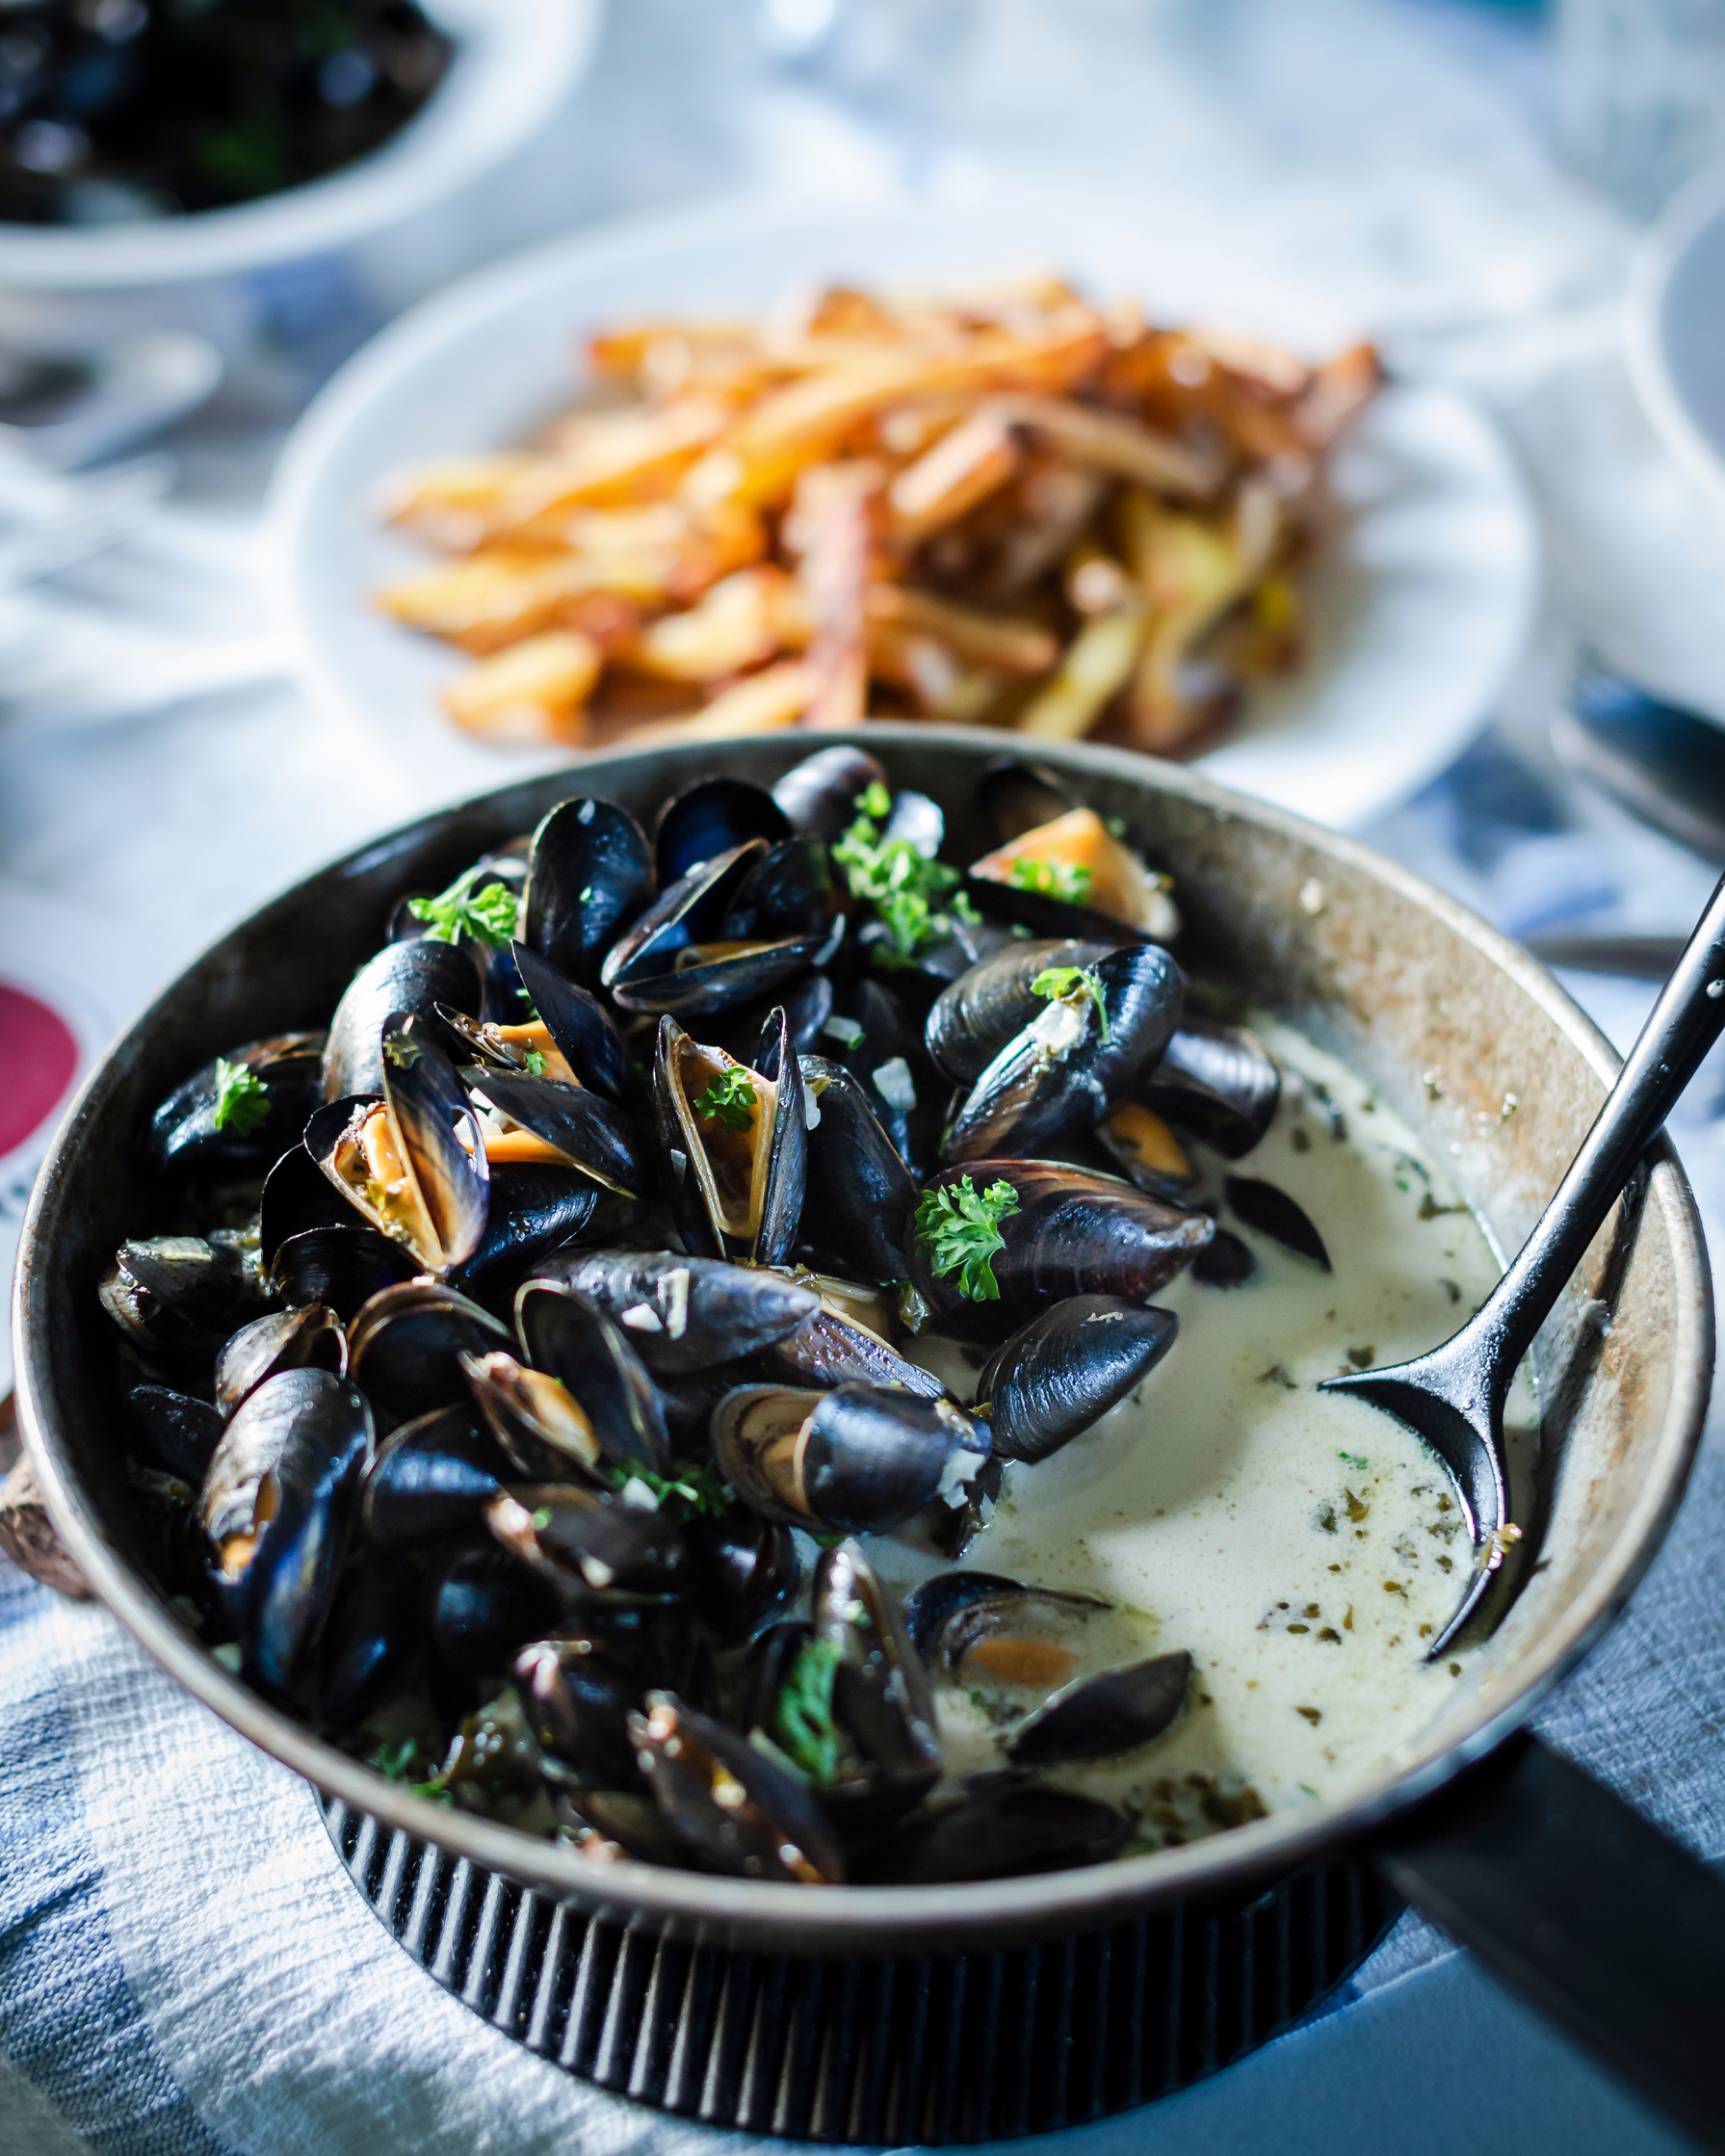 Clams with French Fries - Moules Frites